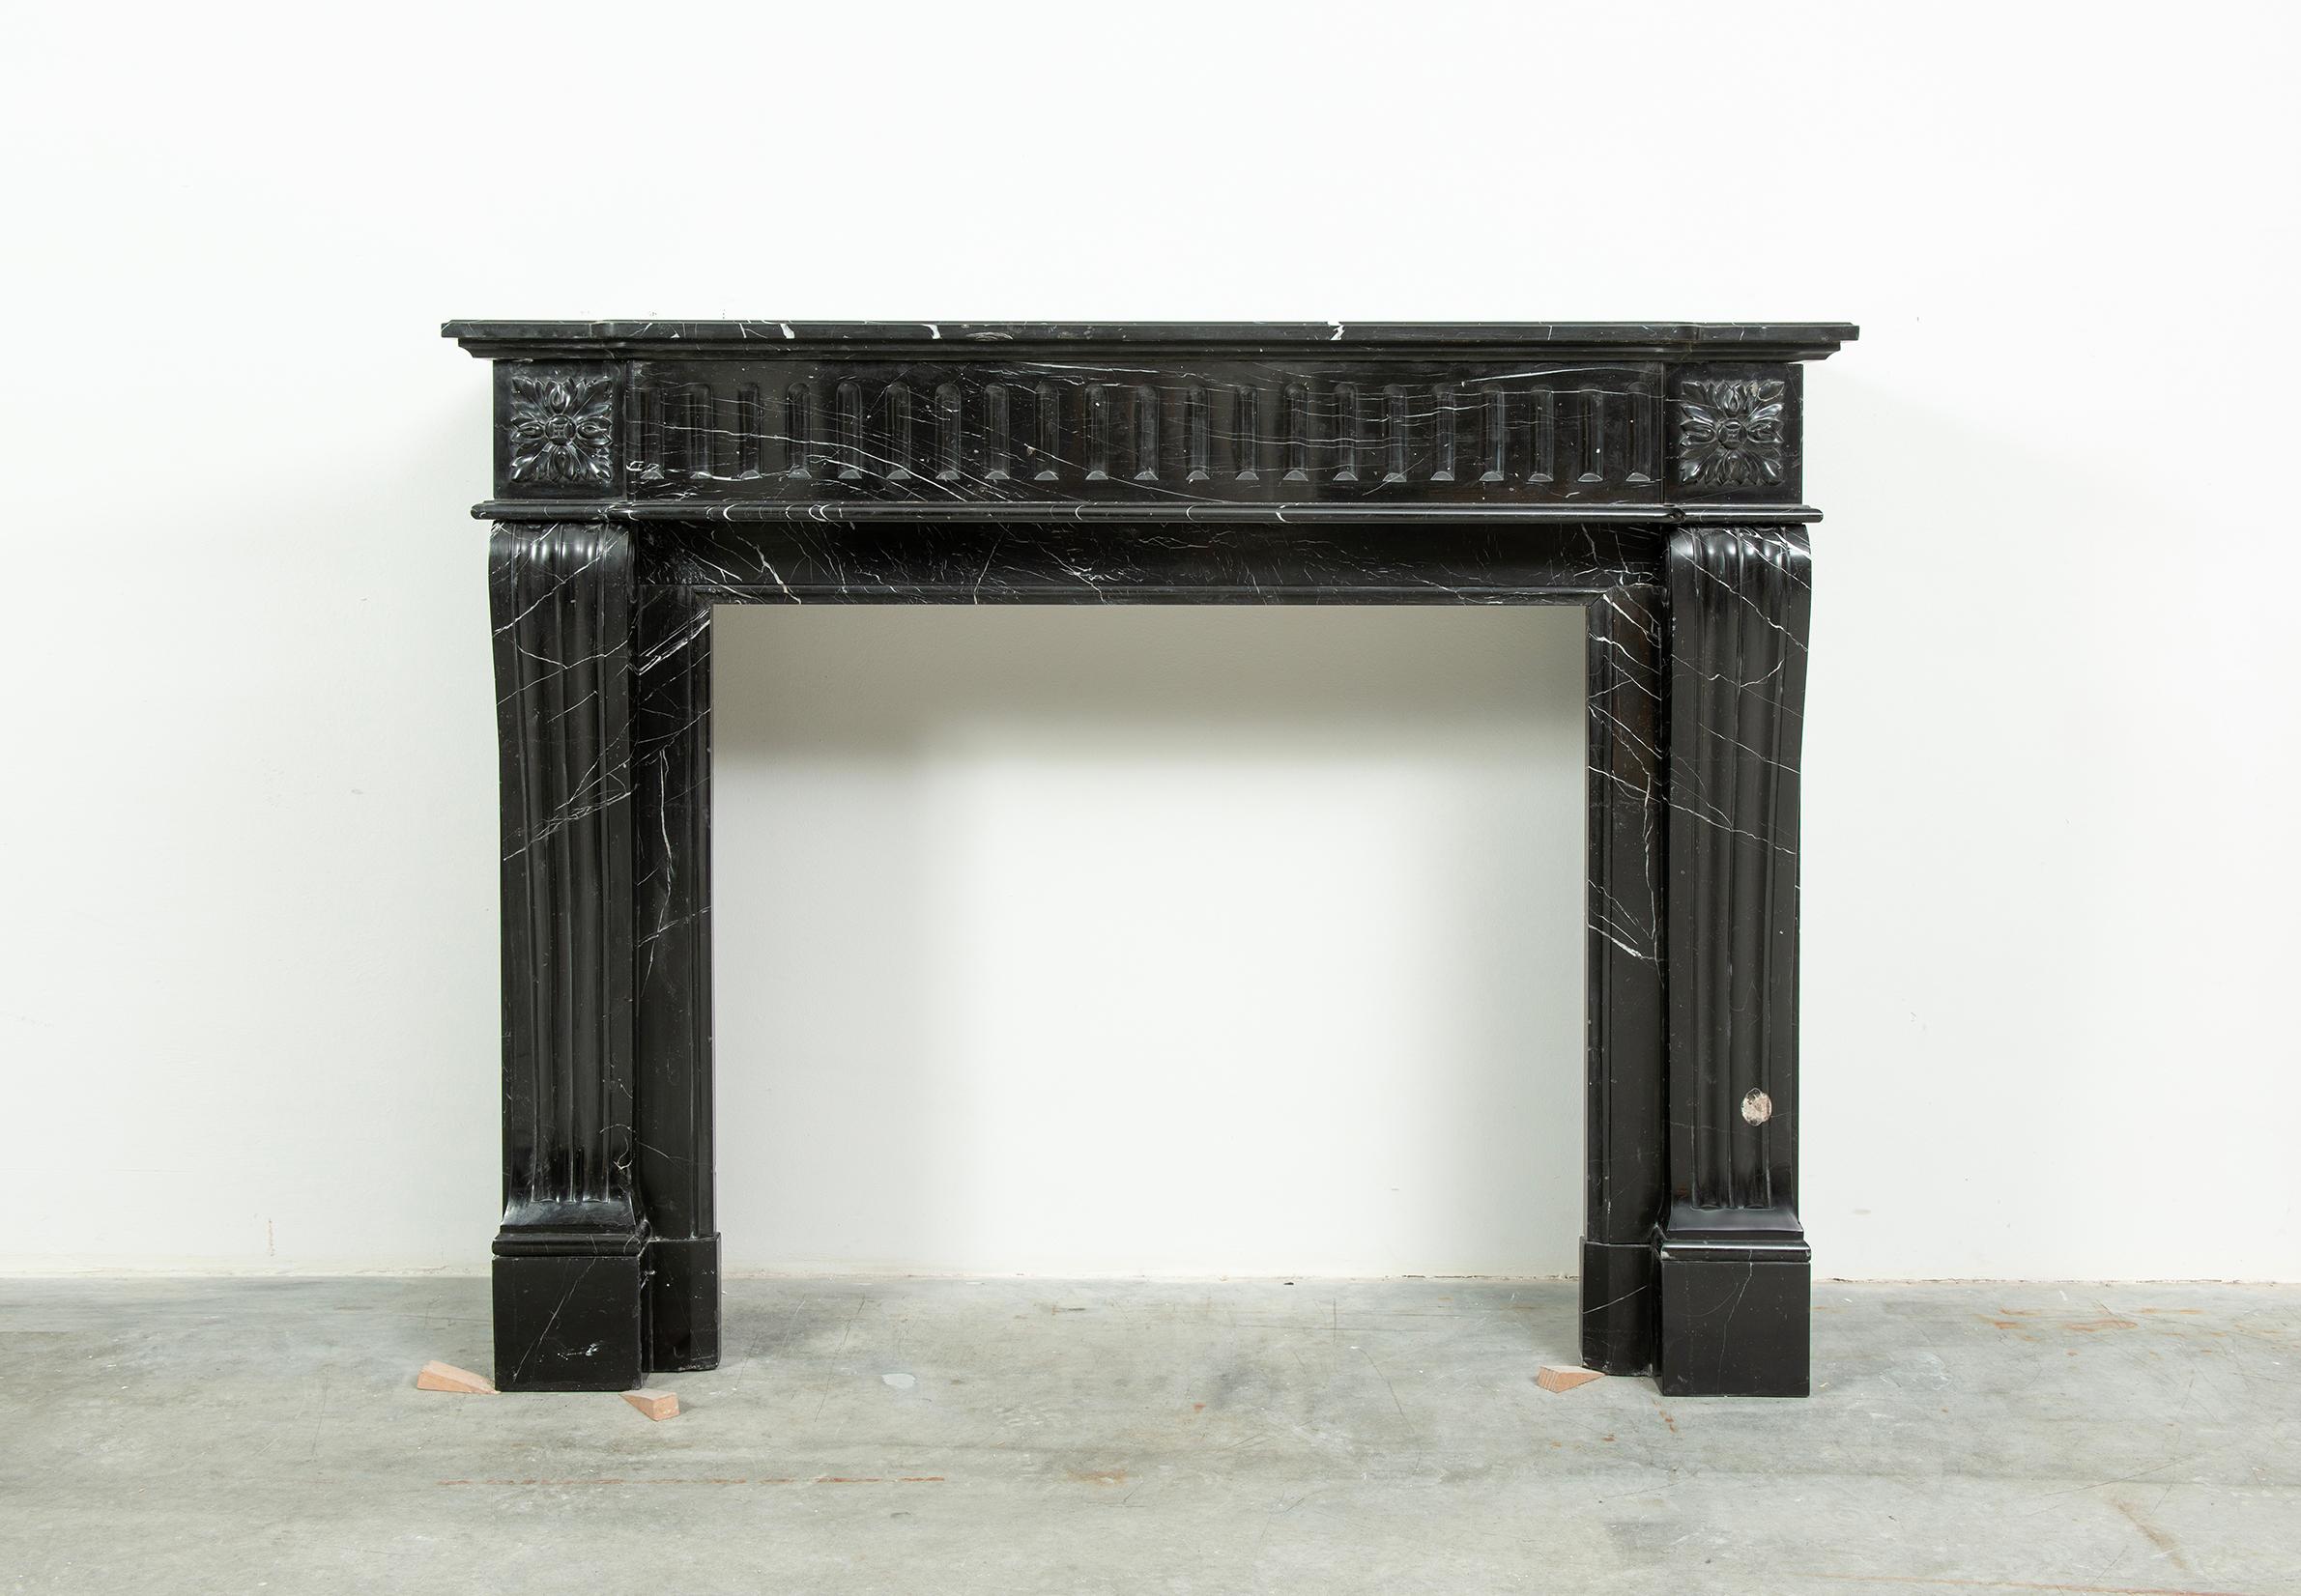 Petite Louis XVI Fireplace Mantel in black marble with striking white veins.

This little French mantel has a nice crisp profiled topshelf above a fluted frieze with lovely decorative floral endblocks that rest on shaped jambs above a sturdy plain